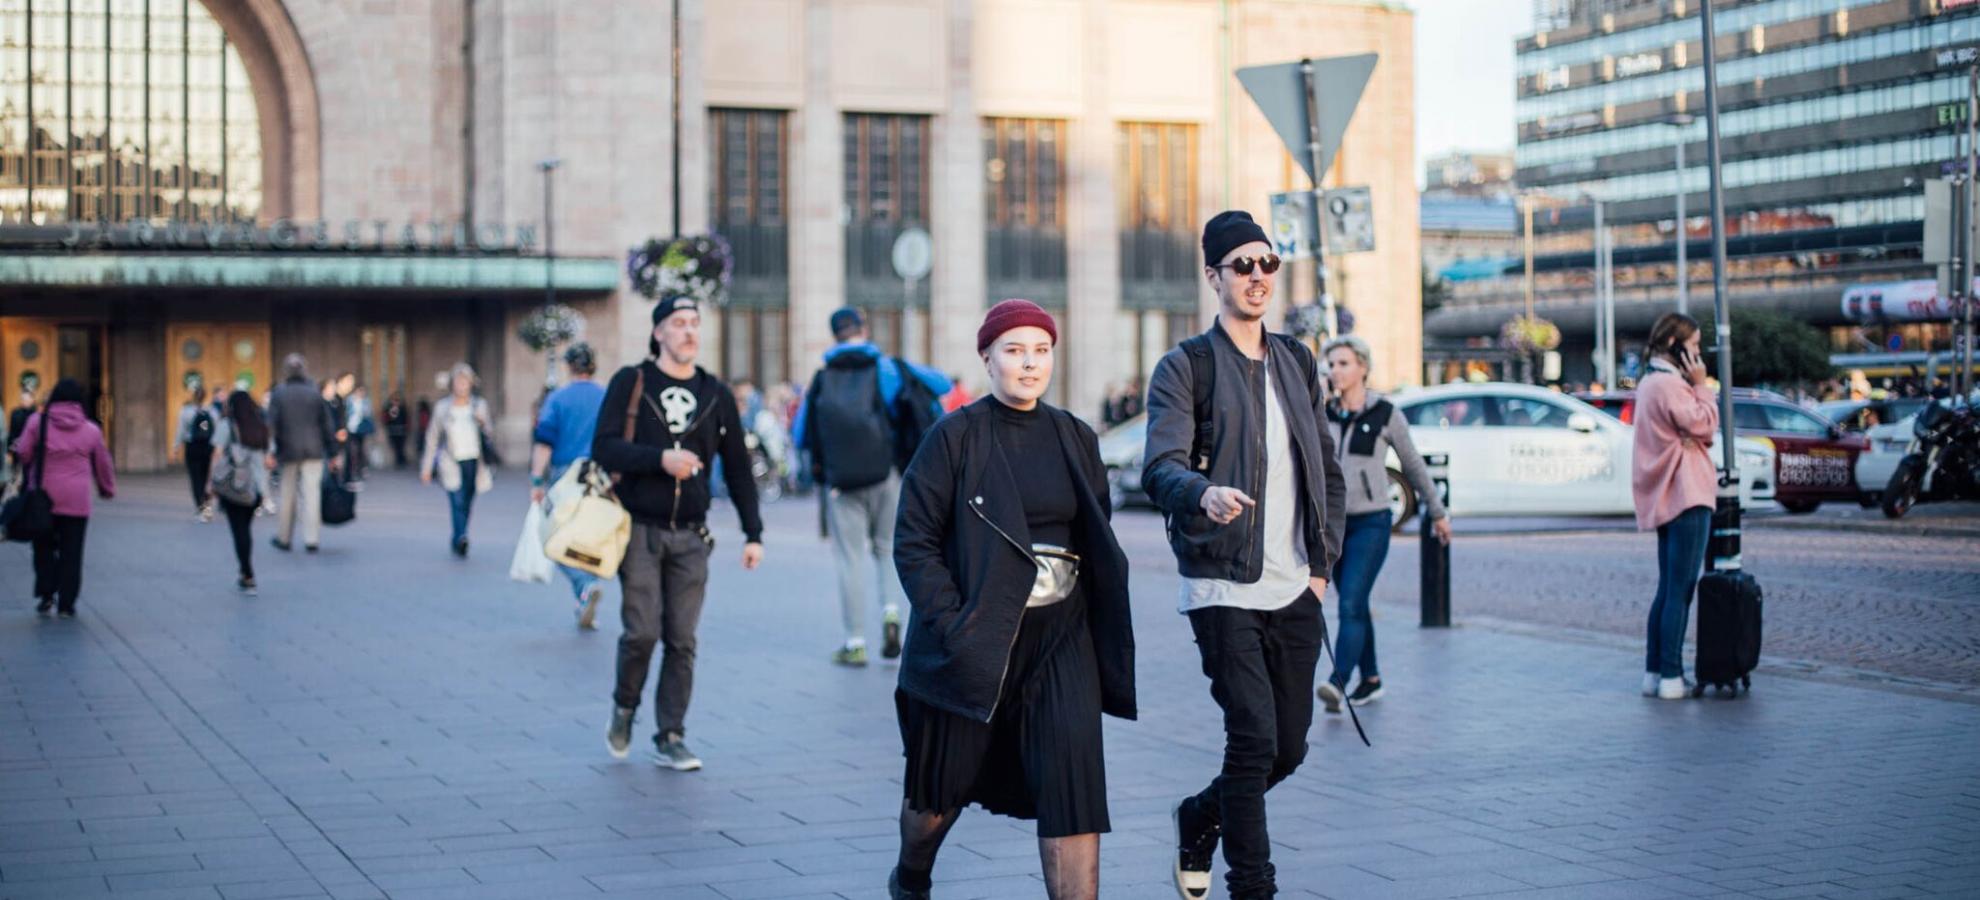 A man and woman, both dressed in black and grey and wearing beanies, are walking away from the Elielinaukio entrance of Helsinki Central railway station, which can be seen in the background. A small throng of people are walking on the pavement behind them in the distance.